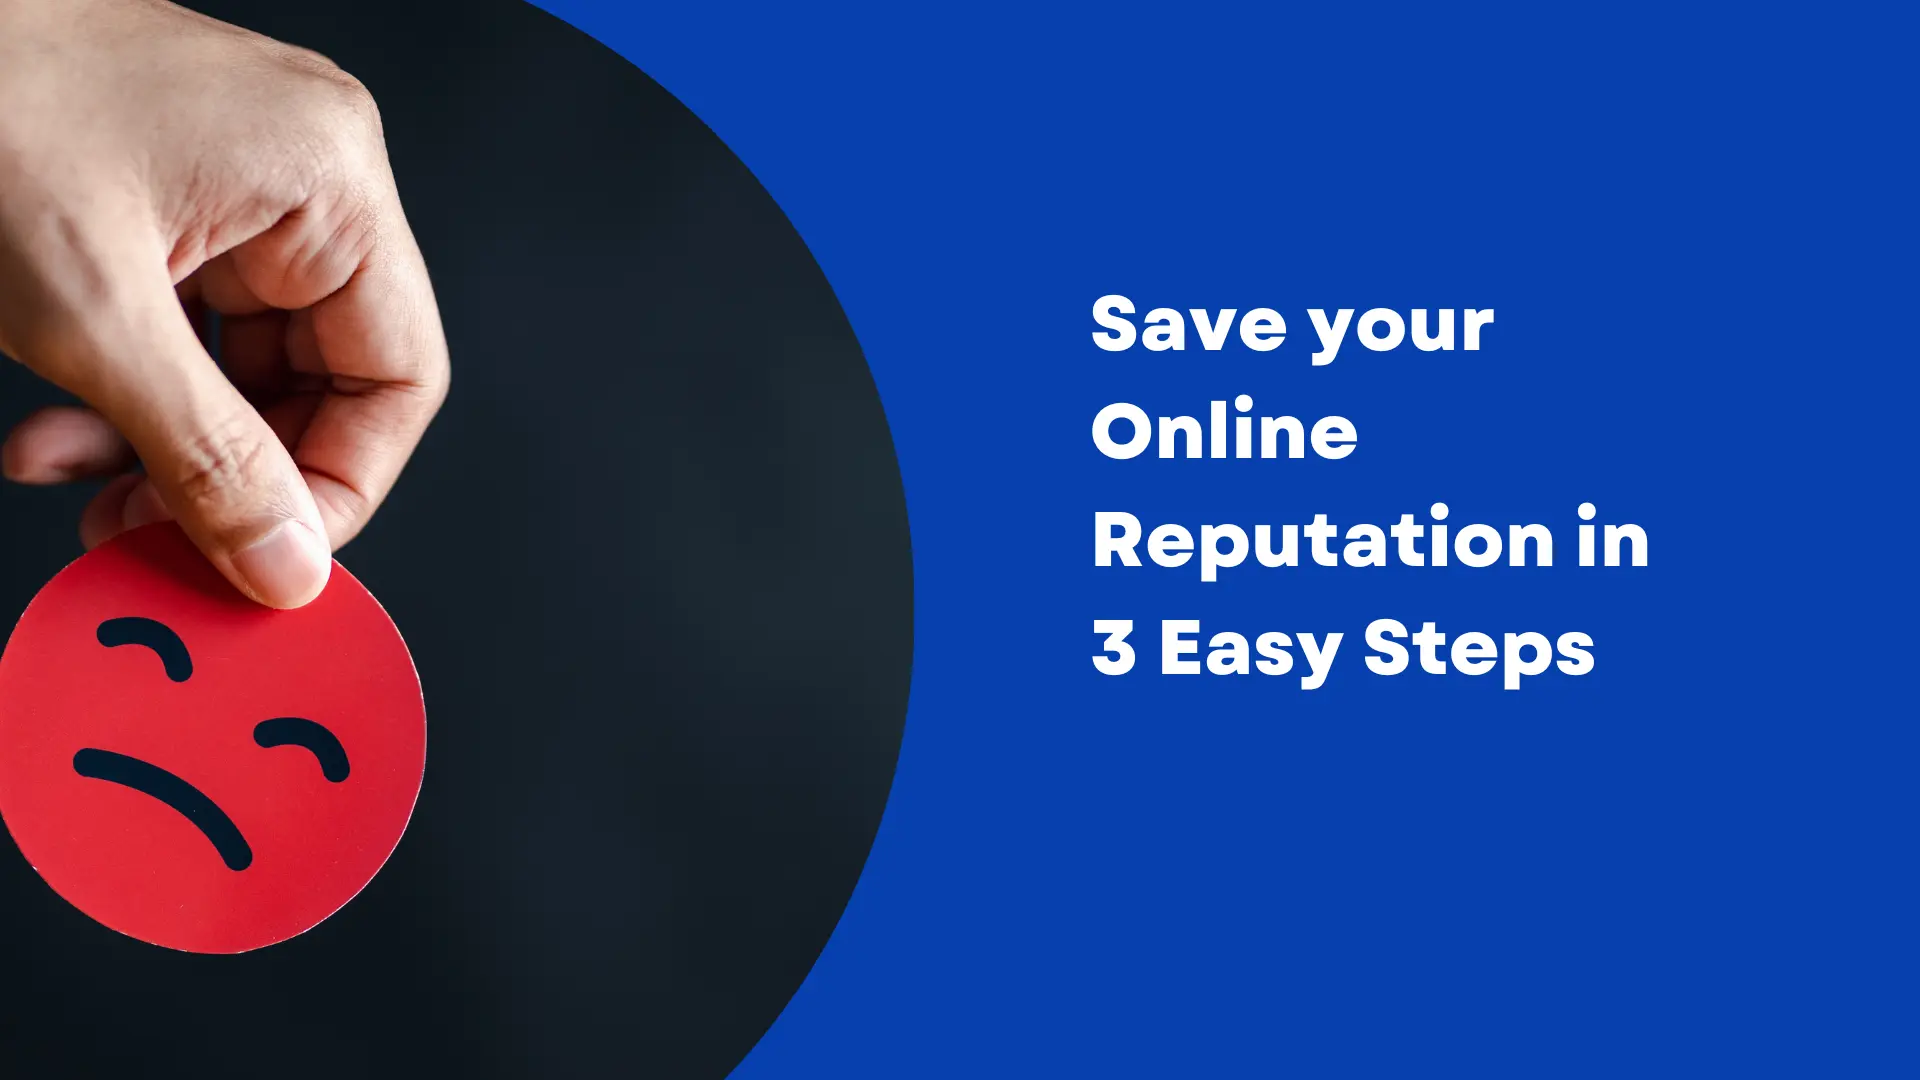 Save Your Online Reputation in 3 Easy Steps